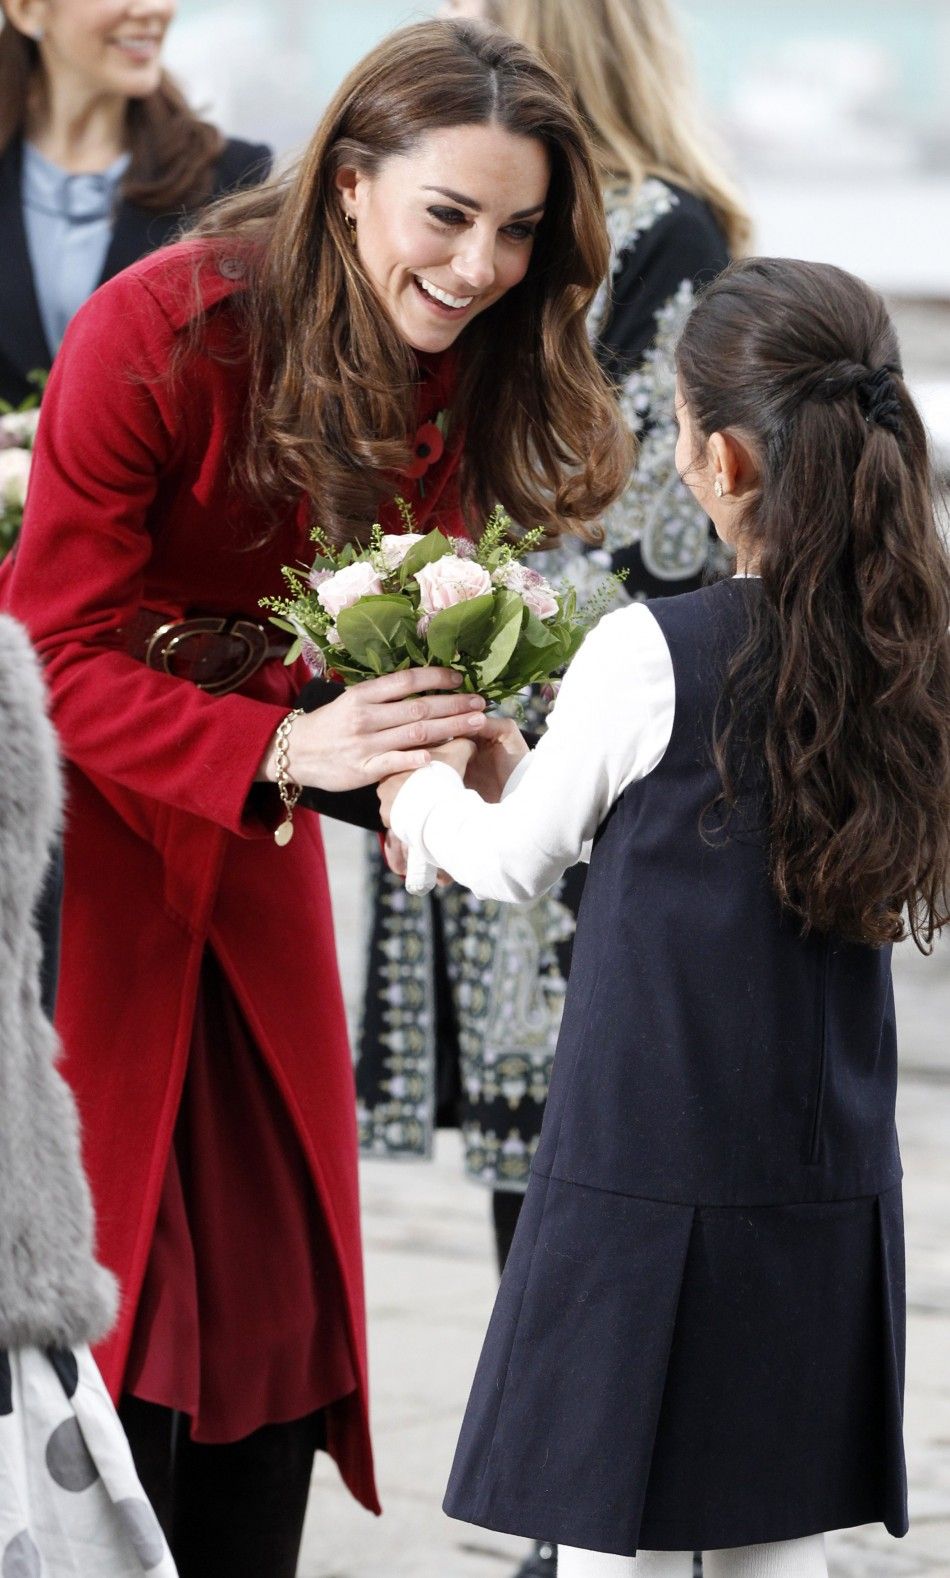 Kate Middleton Donning the Radiant Red The Most Stunning Color for Her Skintone